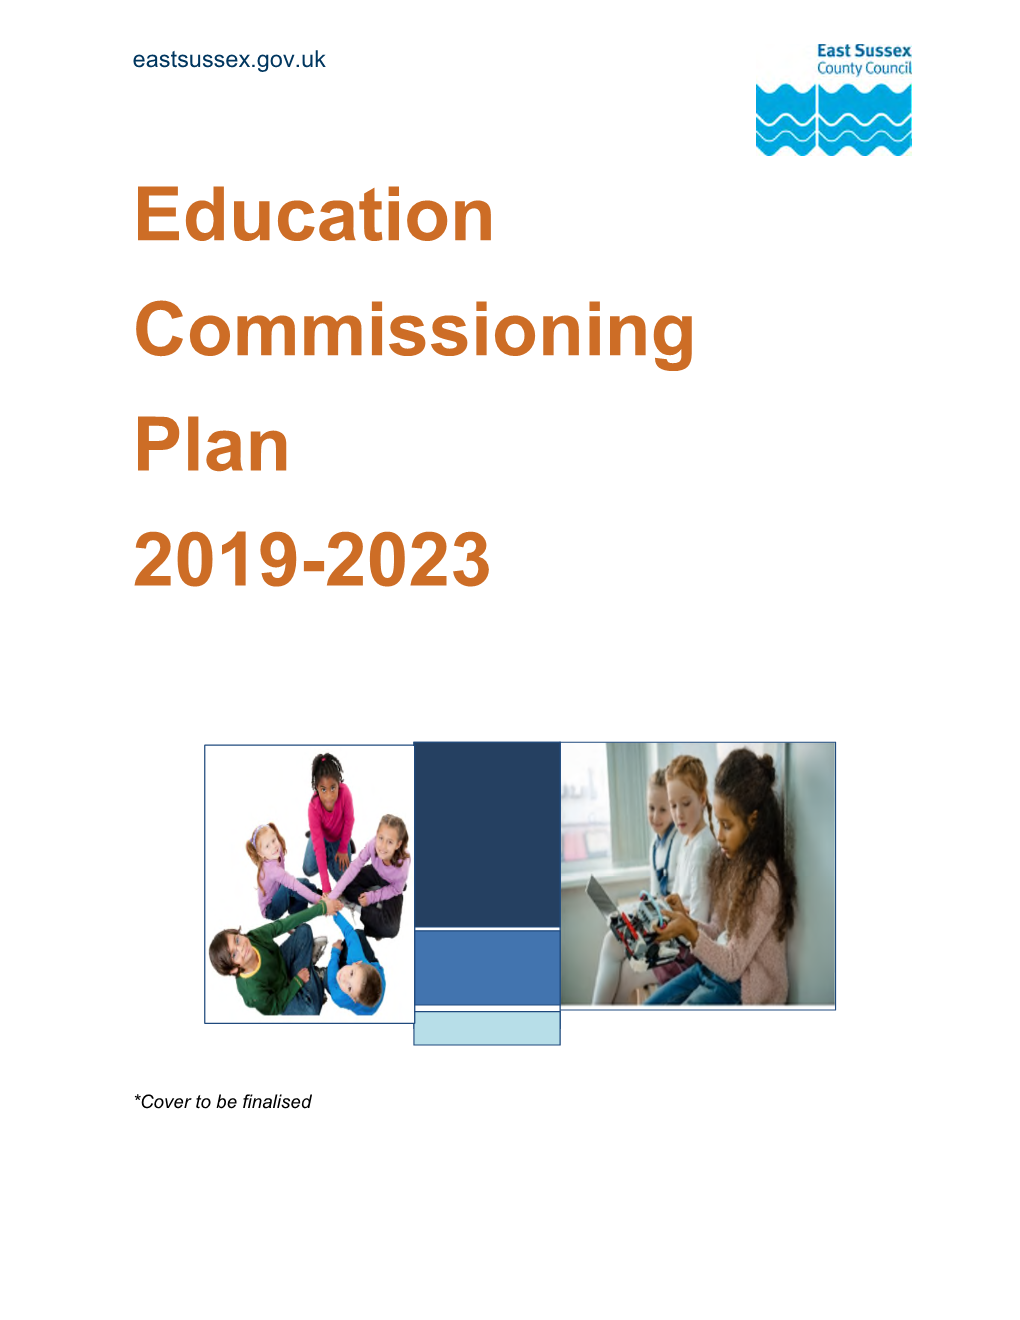 Education Commissioning Plan 2019-2023